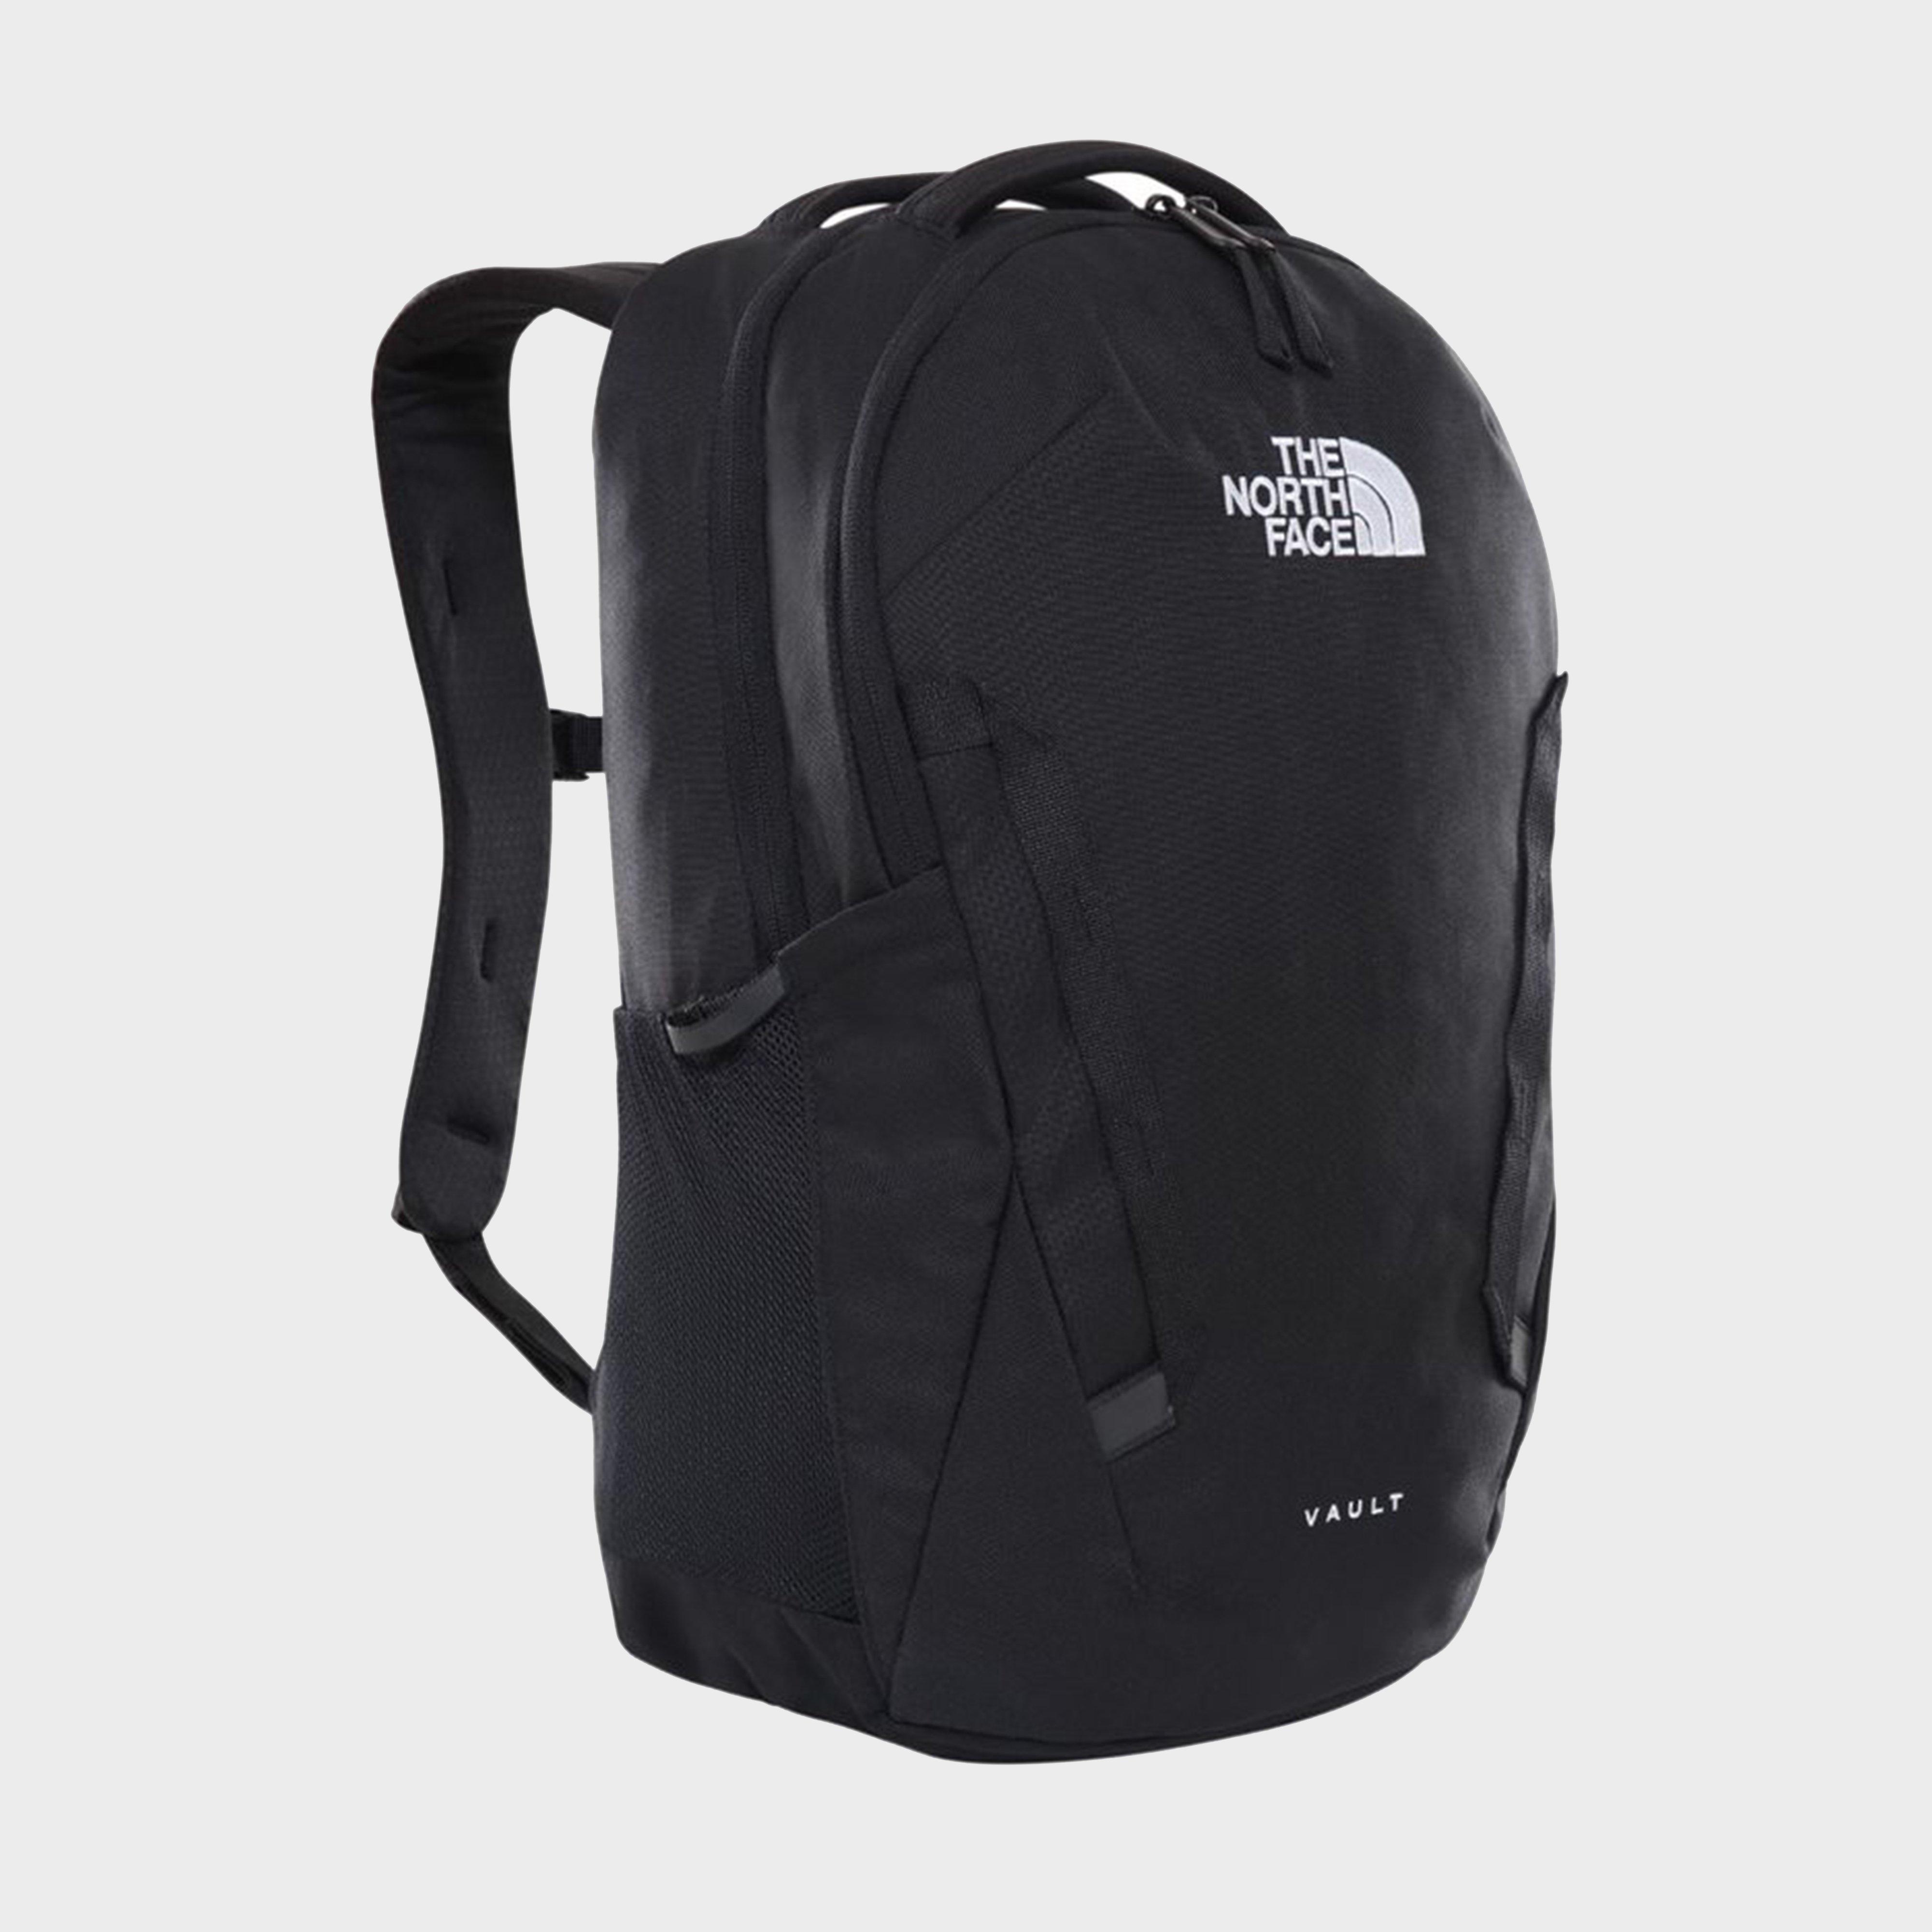  The North Face Vault Backpack, Black